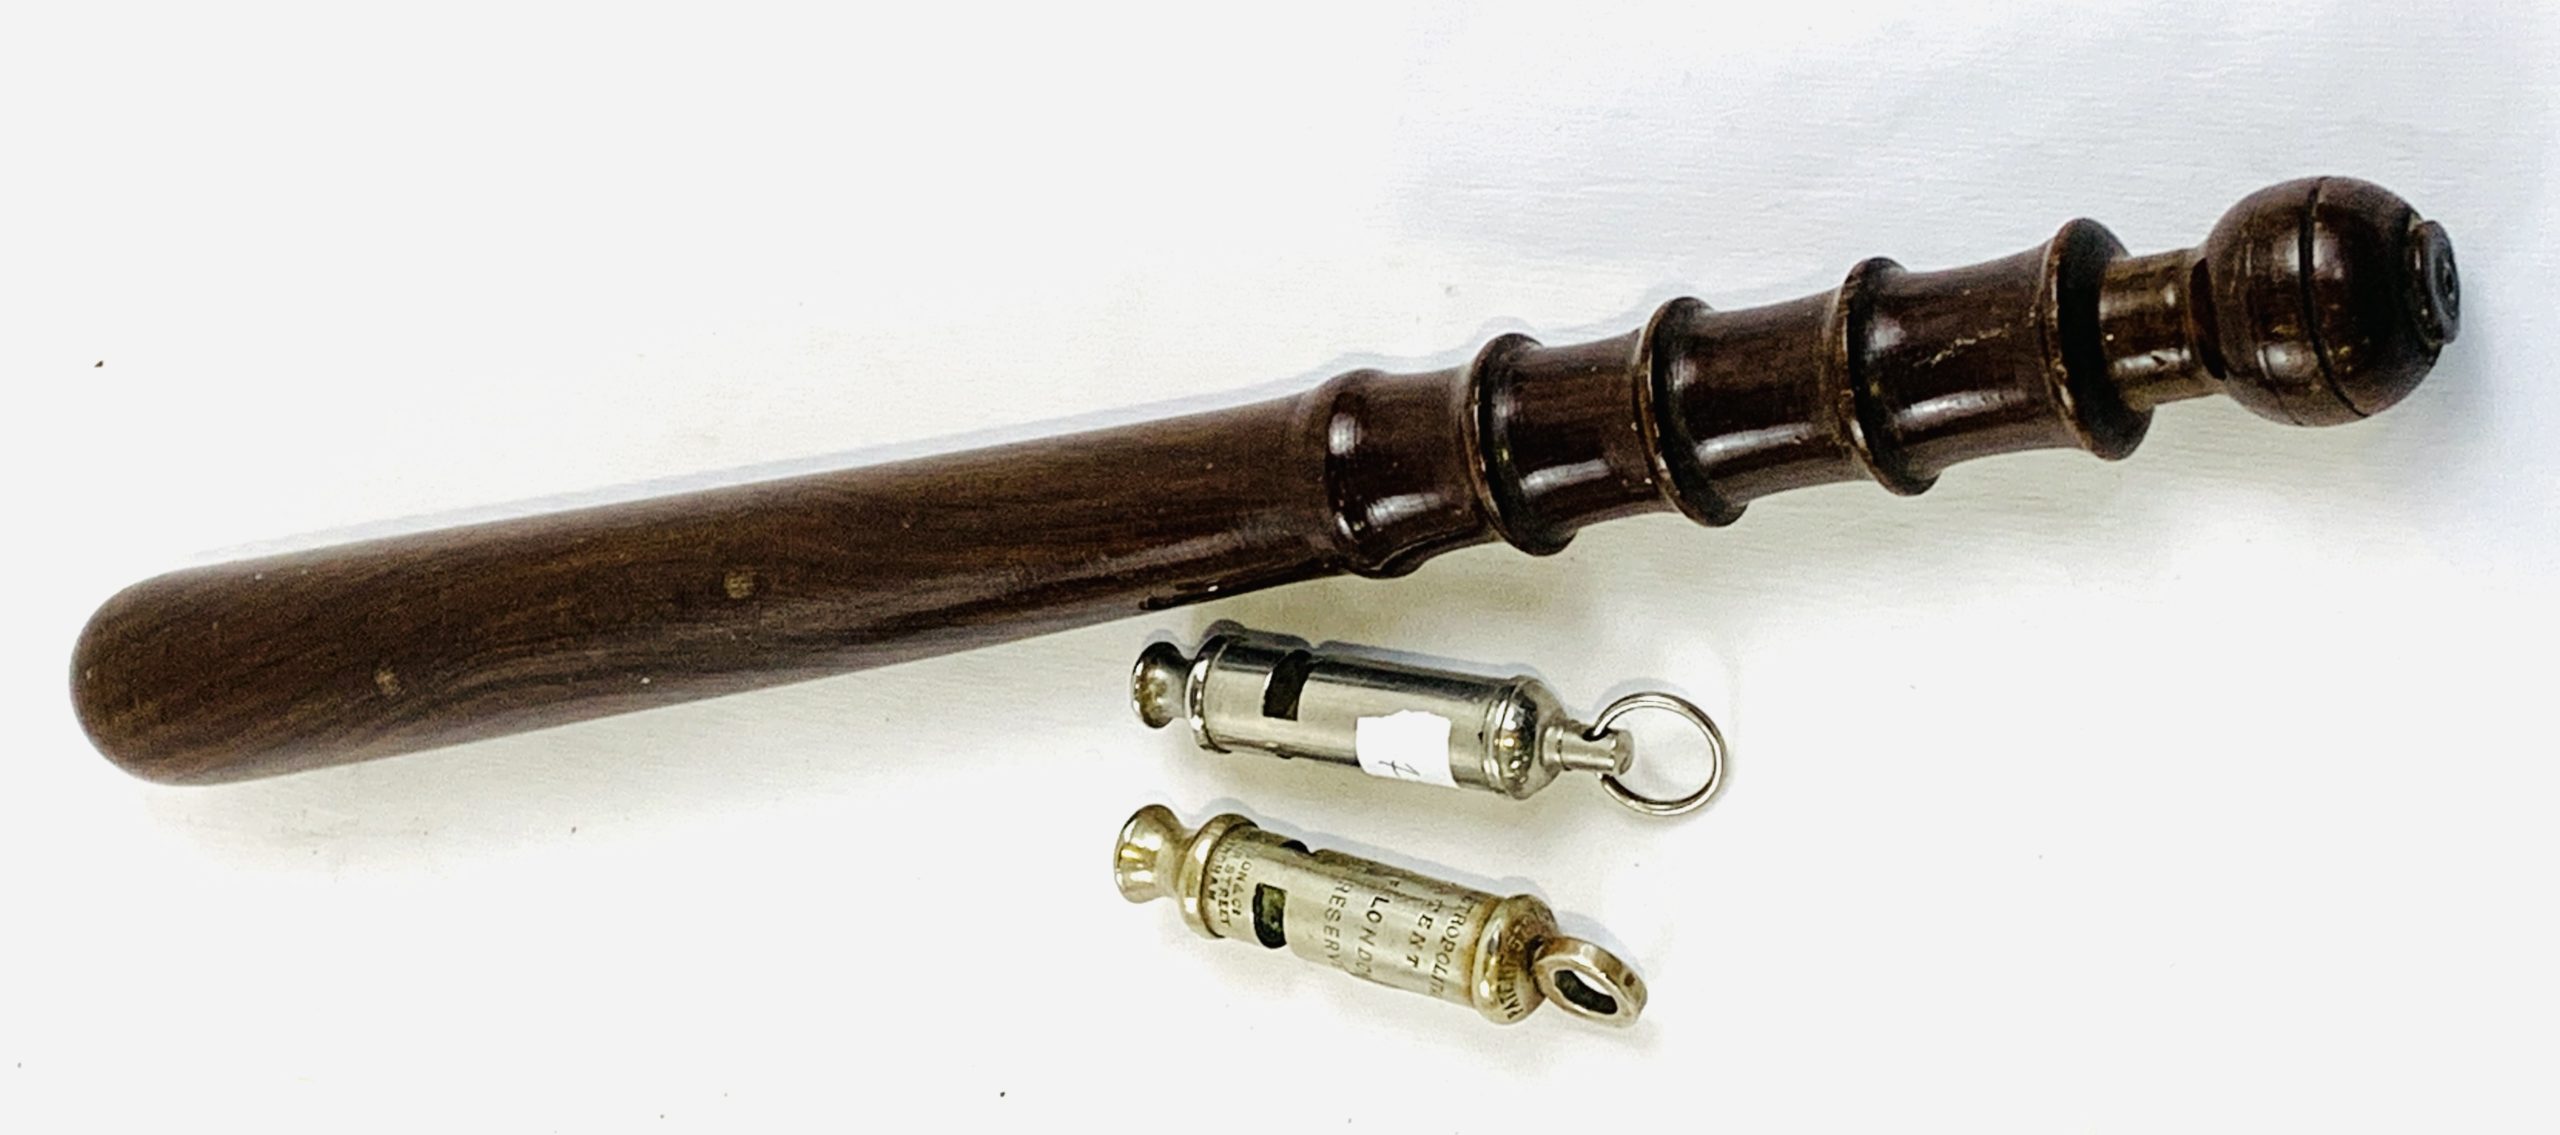 Is it legal to carry a truncheon in the UK?